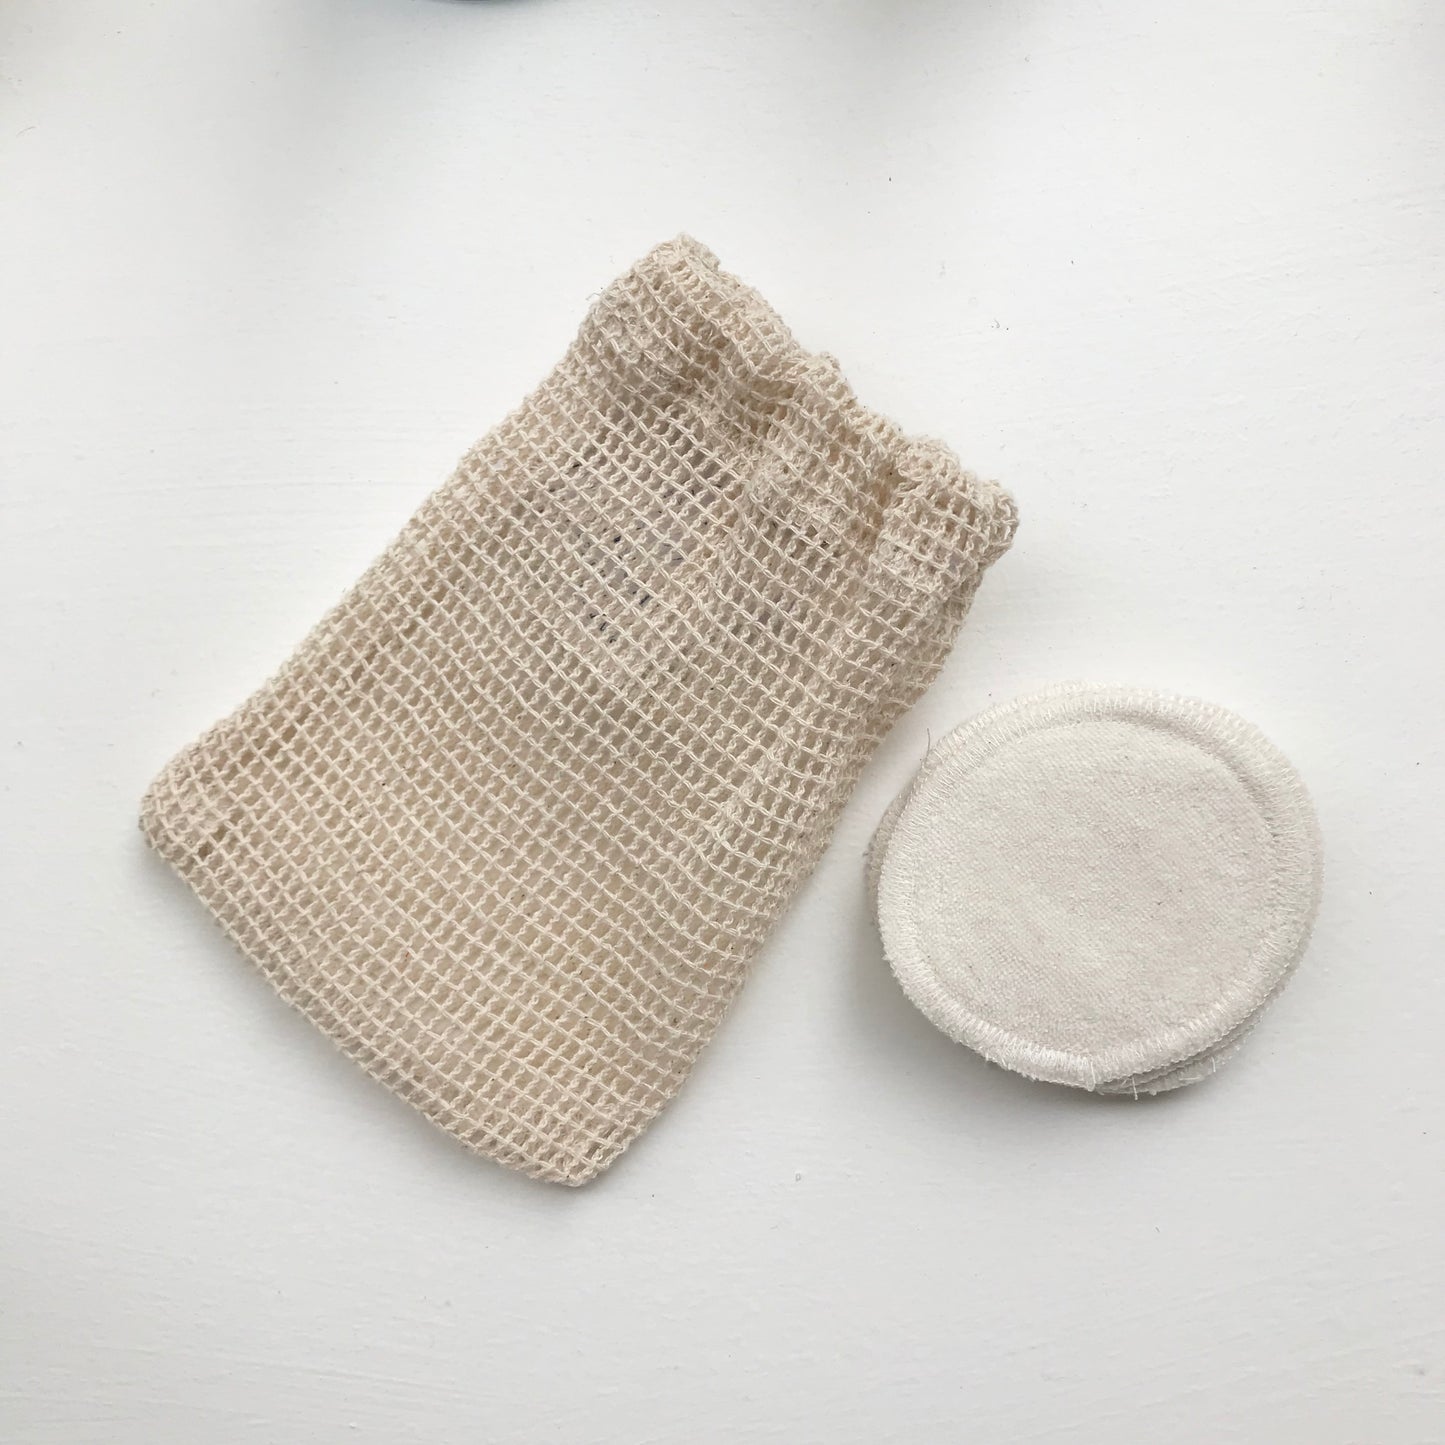 Make Up Removal Pads